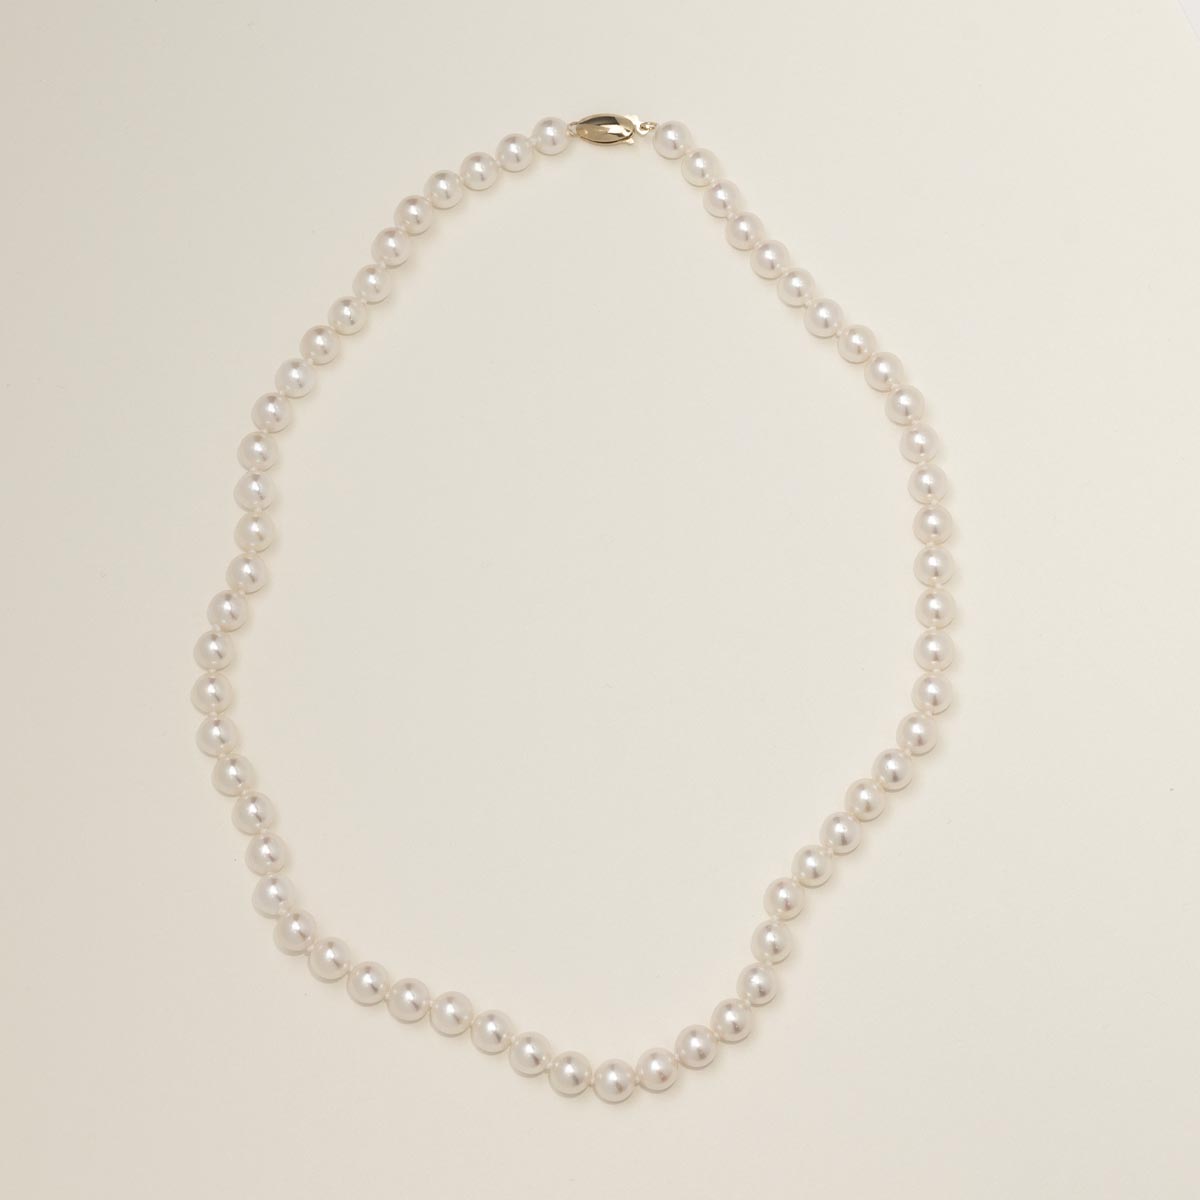 Mastoloni Cultured Akoya Pearl Strand Necklace in 14kt Yellow Gold (7-7.5mm pearls)